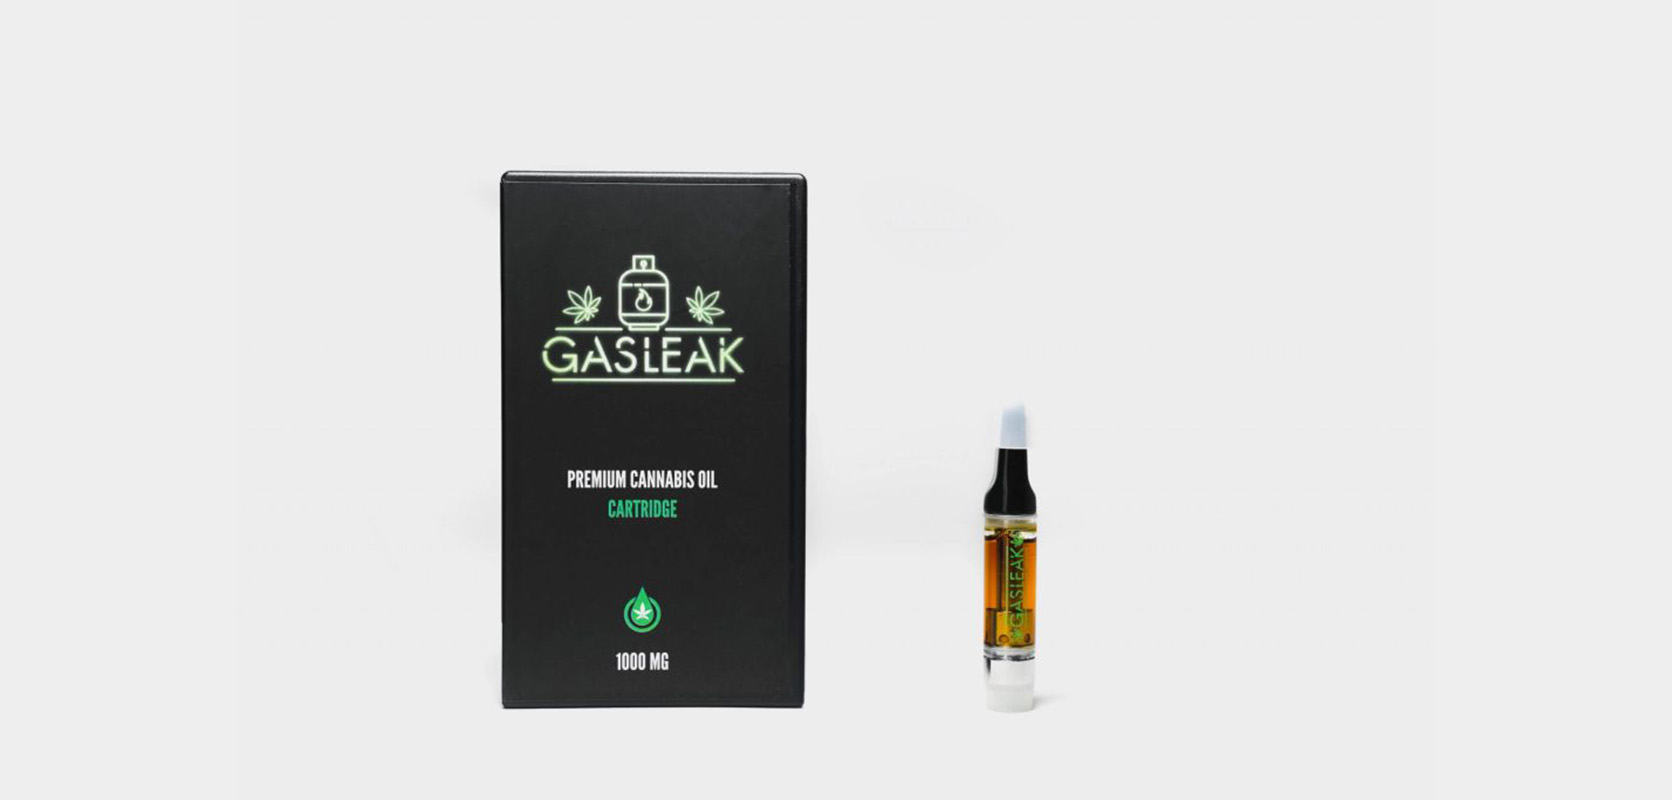 THC Vape Cartridges from Gasleak at West Coast Cannabis weed dispensary for mail order marijuana weed online Canada.